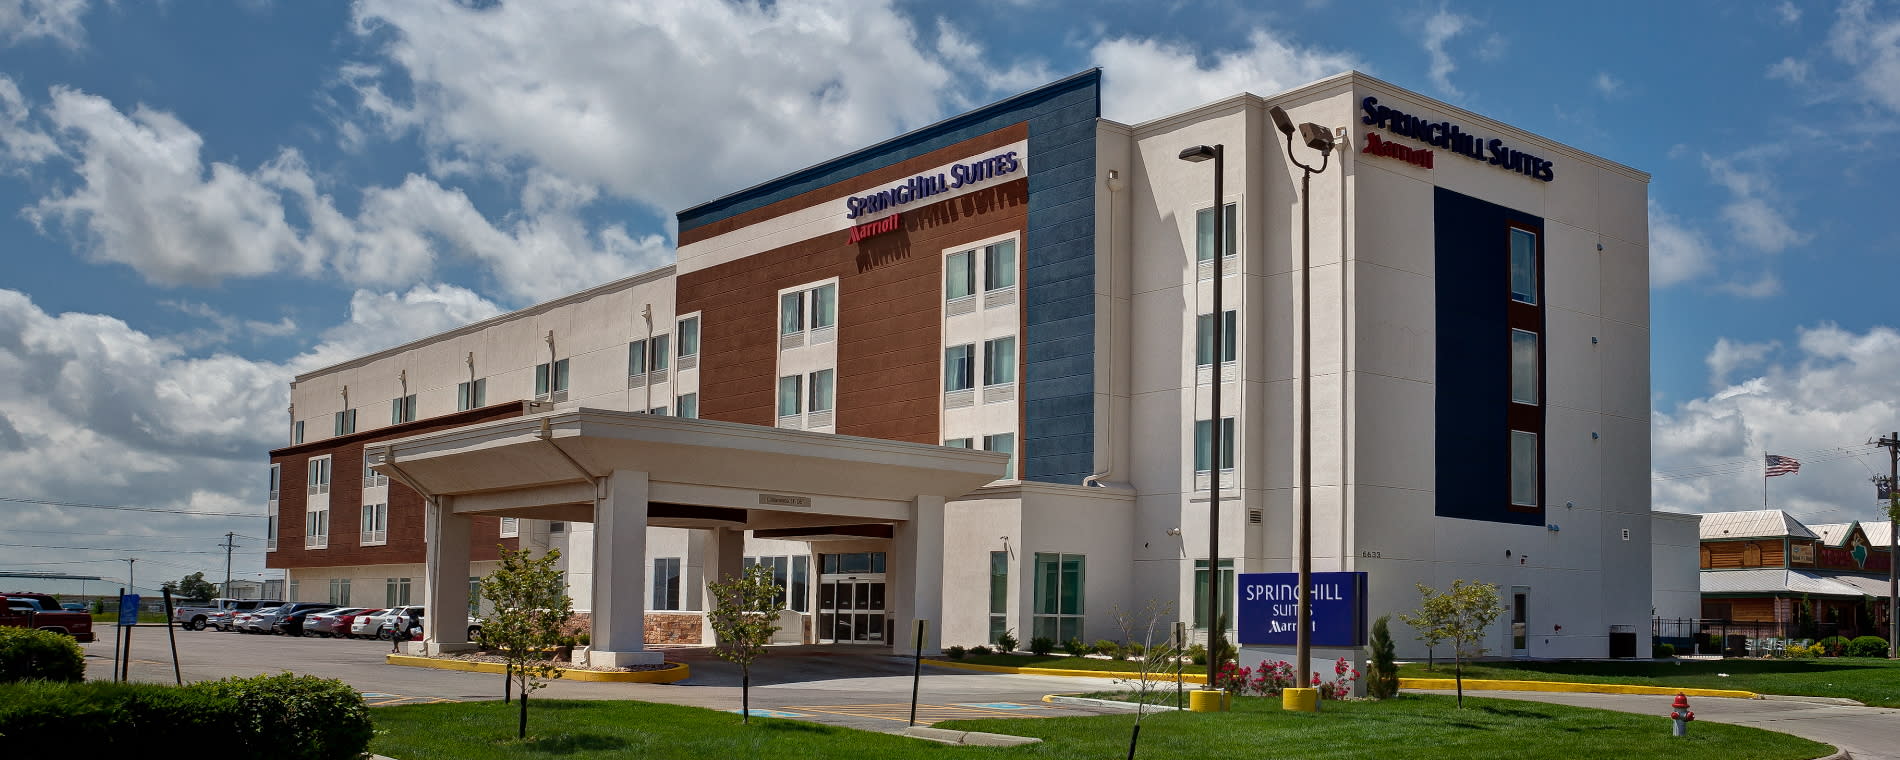 Springhill Suites by Marriott Wichita Airport Exterior